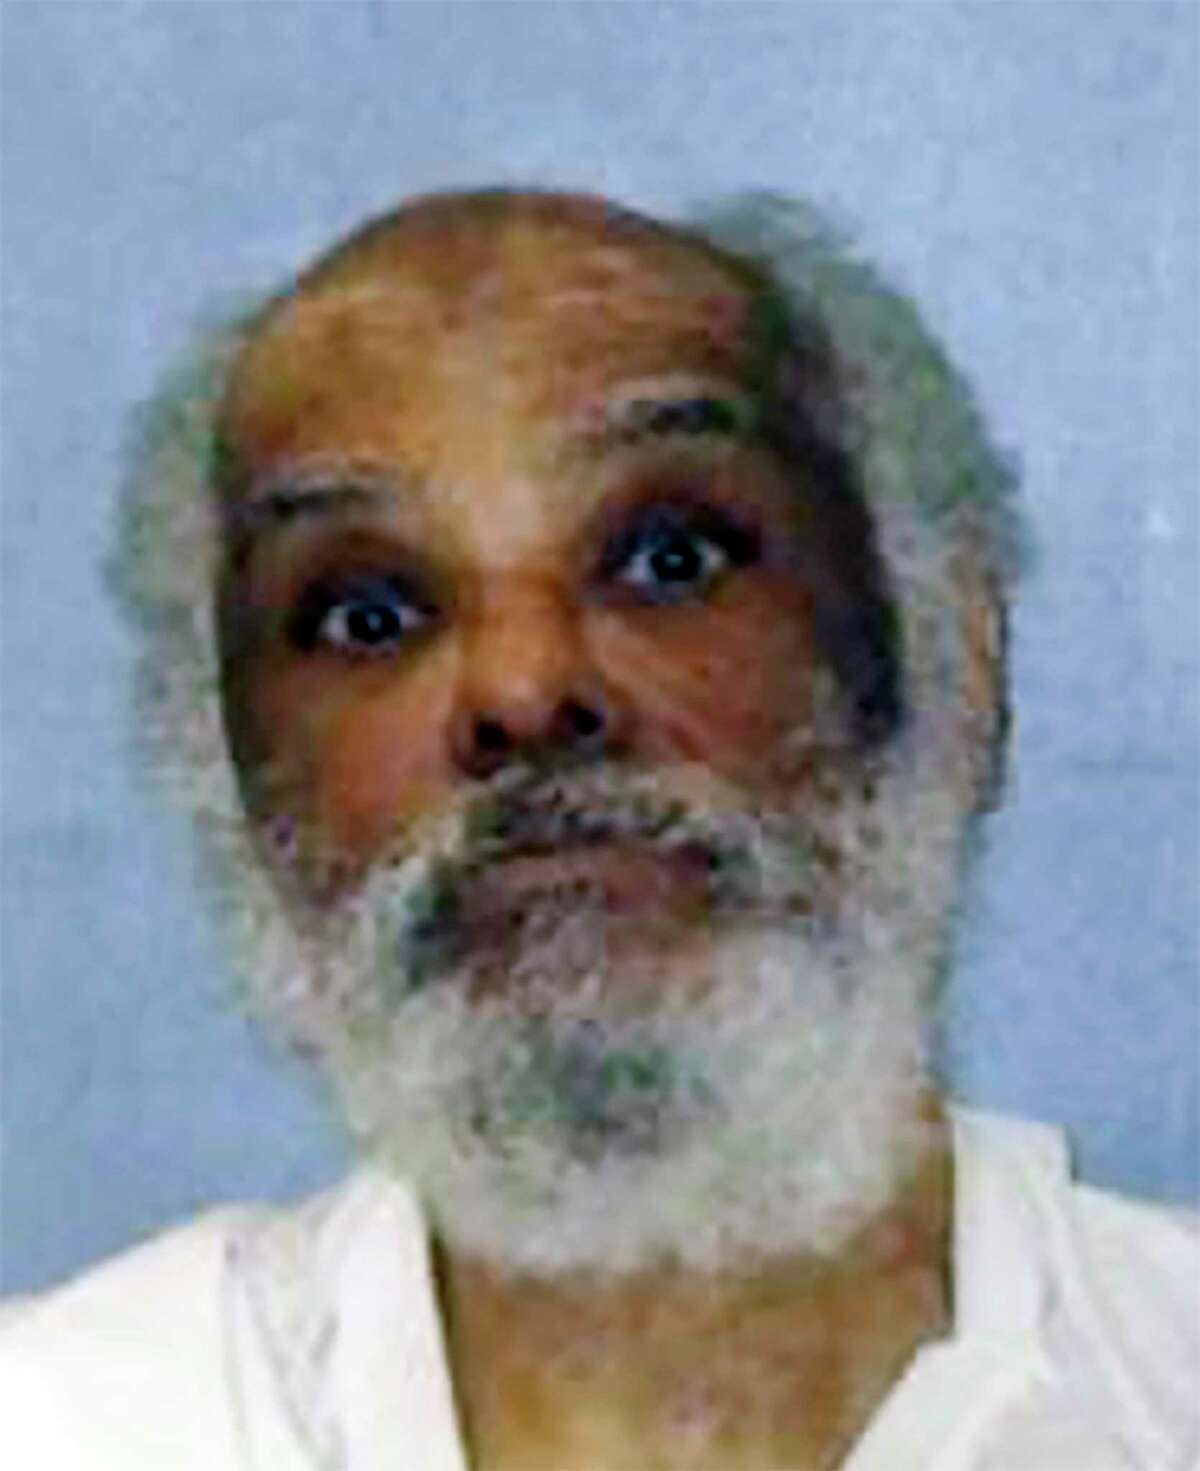 This photo provided by the Texas Department of Criminal Justice shows Raymond Riles. Riles, the longest serving death row inmate in the U.S. was resentenced to life in prison on Wednesday, June 9, 2021 after prosecutors in Texas concluded the 71-year-old man is ineligible for execution and incompetent for retrial due to his long history of mental illness. (Texas Department of Criminal Justice via AP, File)